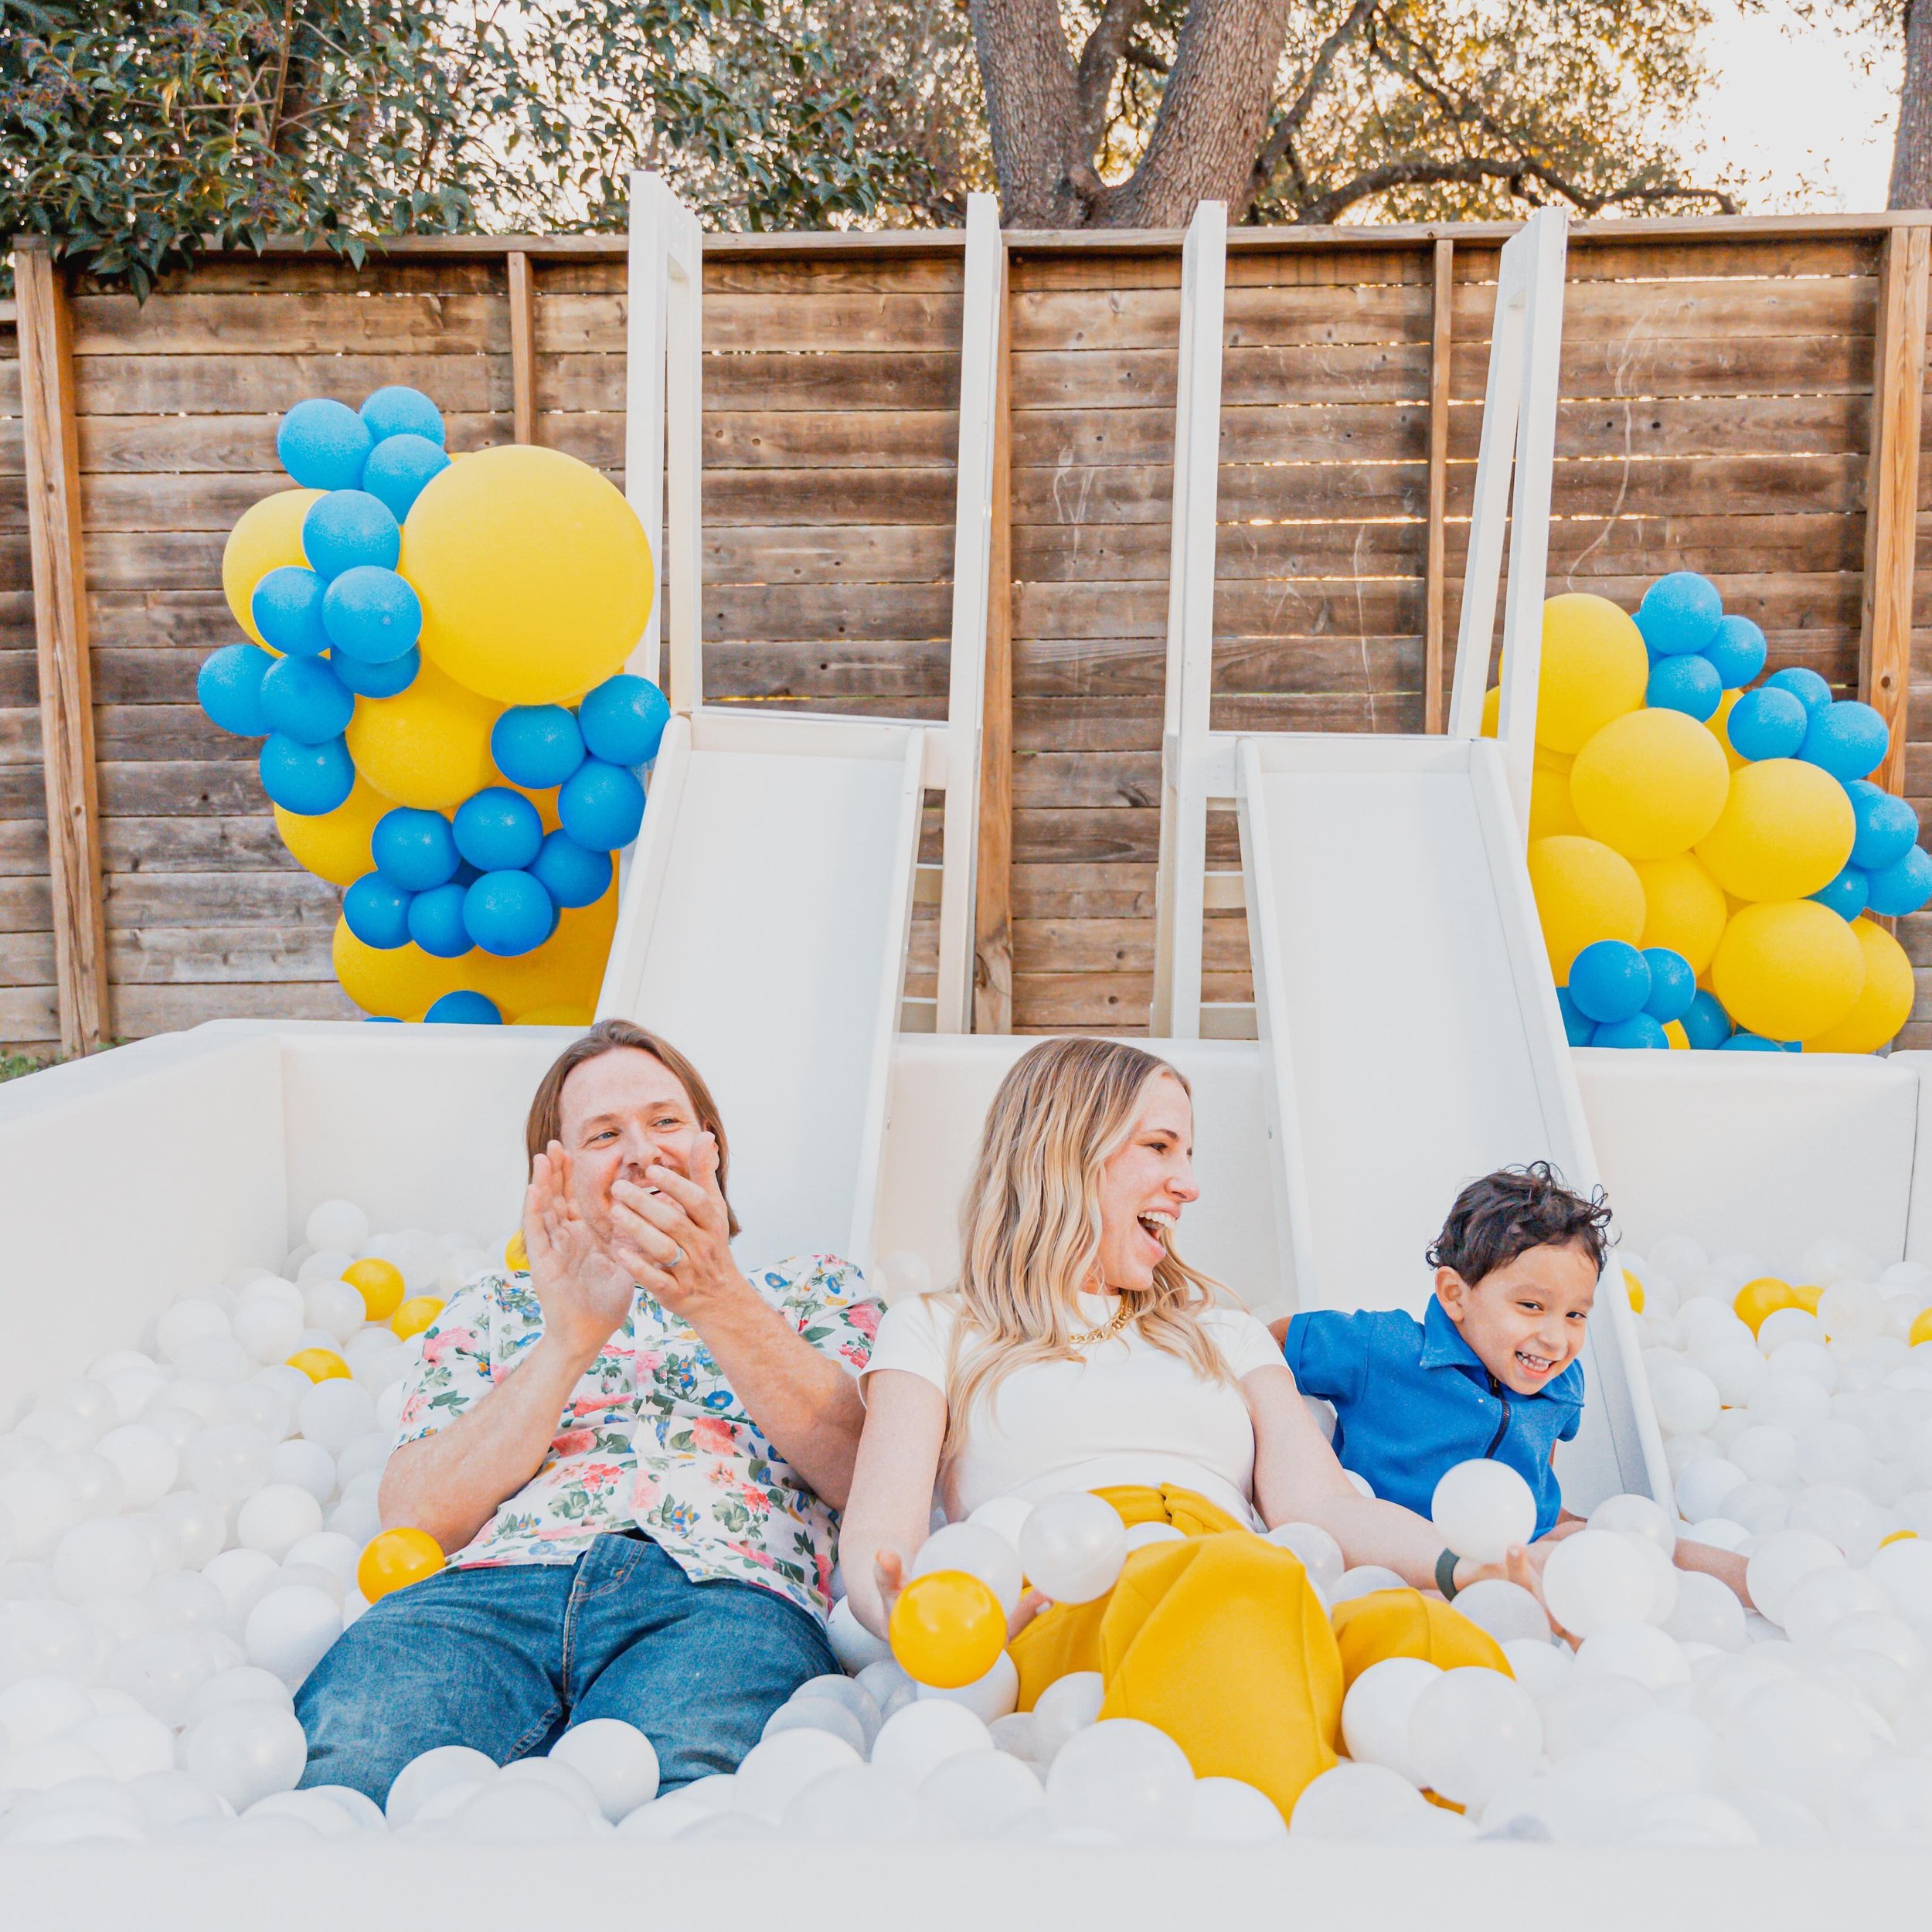 Hands down the most fun parents award goes to Chelle @urbanbetty and David @daveiampics !! Isaac sure is a lucky kiddo!! #atxkids #austinkids #atxeventplanner #austineventplanner